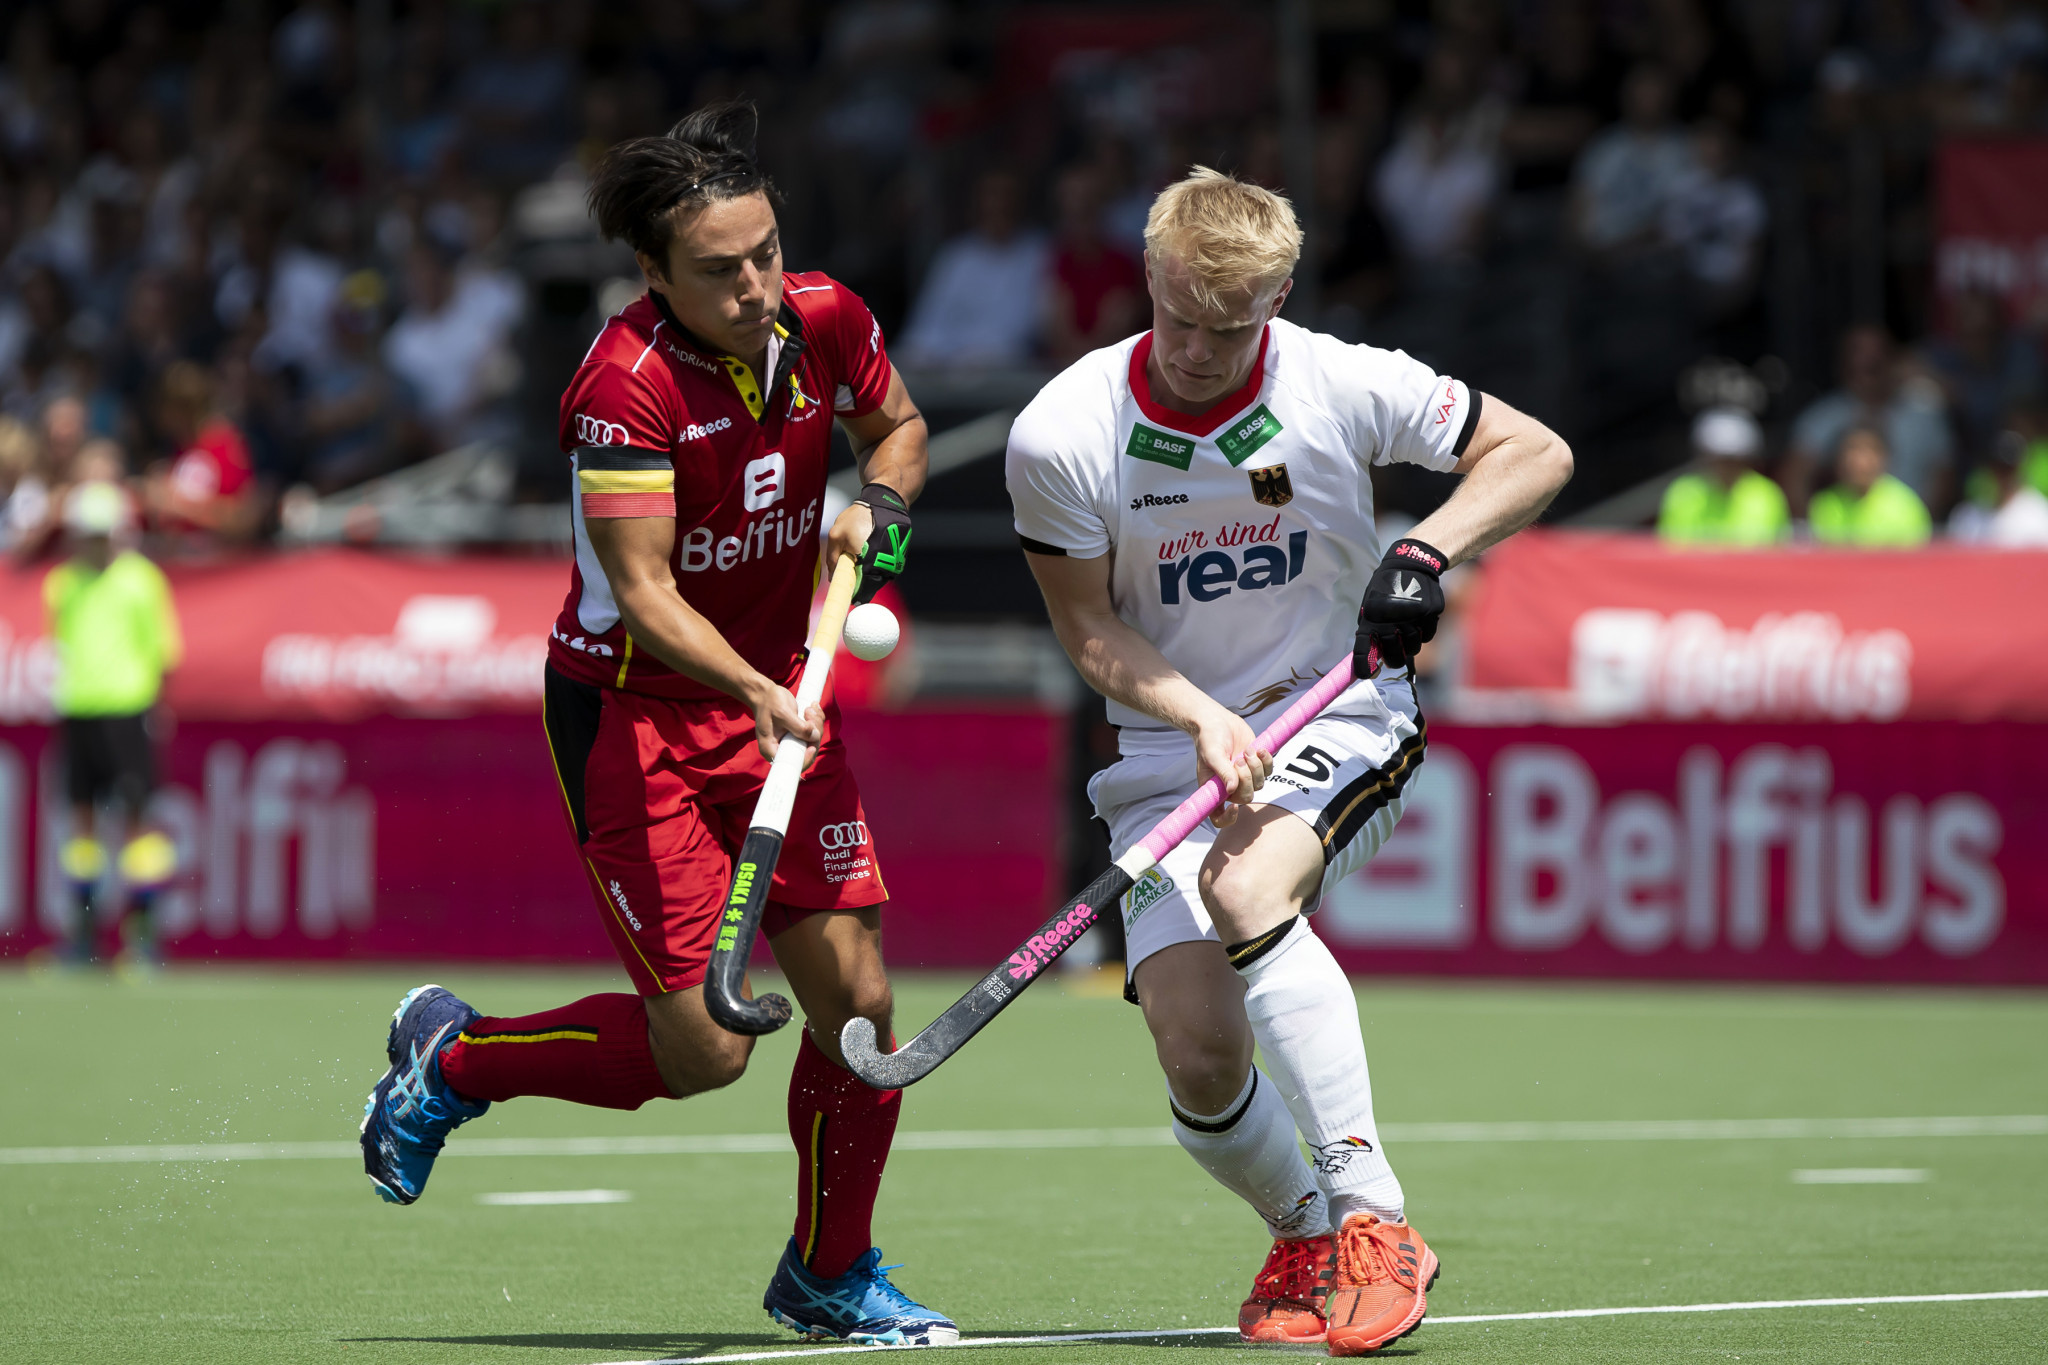 Germany boost Grand Final hopes with victory over Spain in men's FIH Pro League